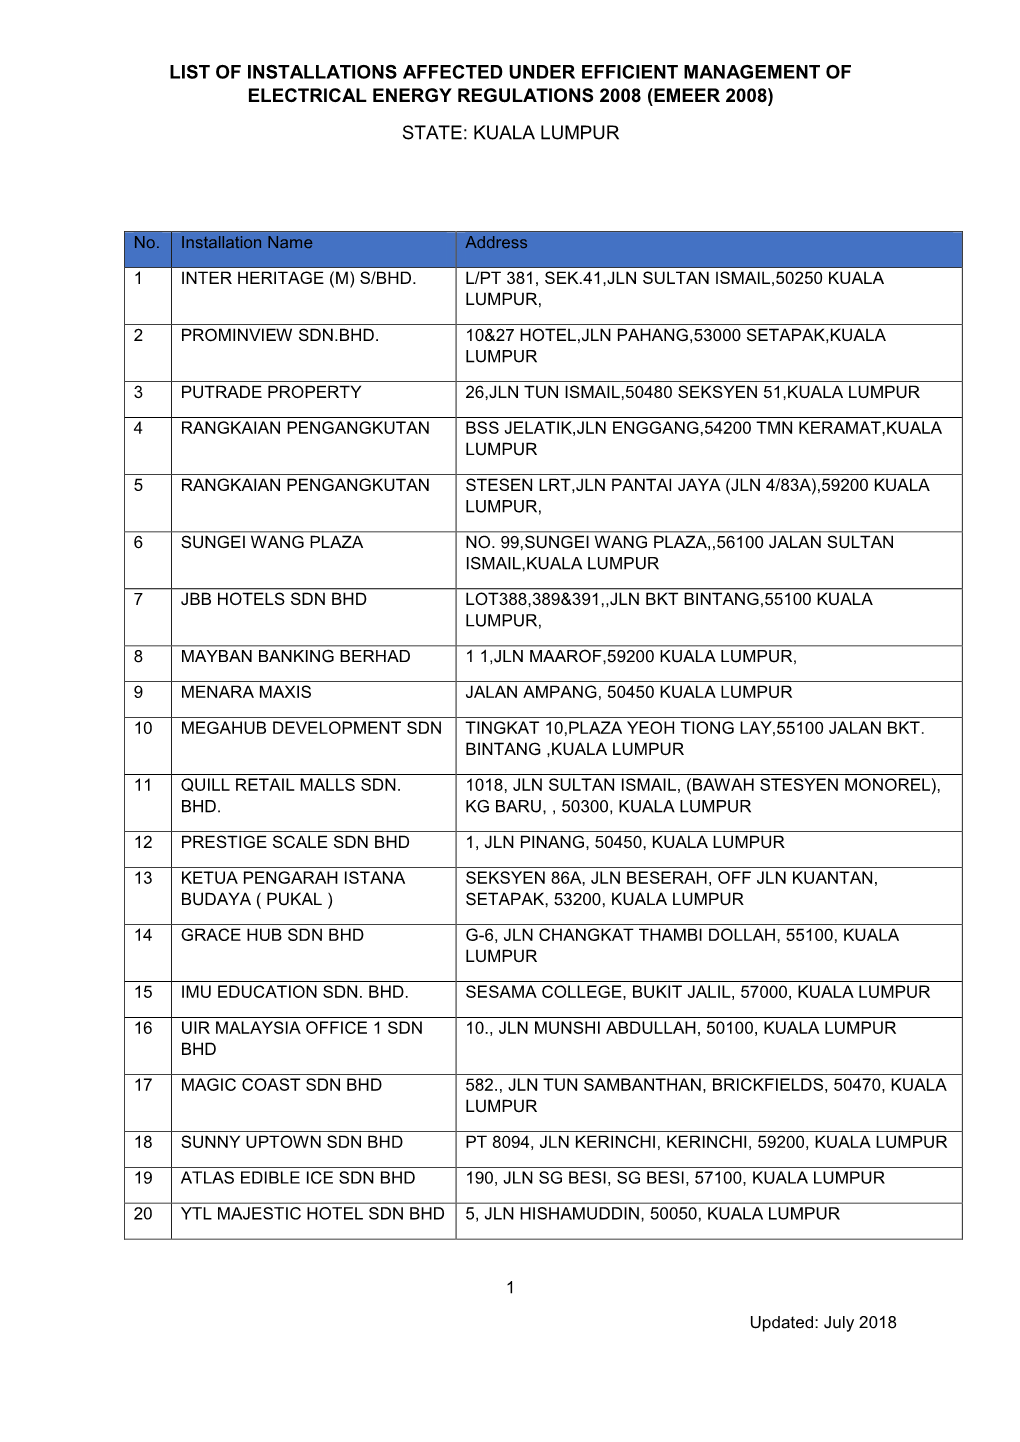 List of Installations Affected Under Efficient Management of Electrical Energy Regulations 2008 (Emeer 2008) State: Kuala Lumpur